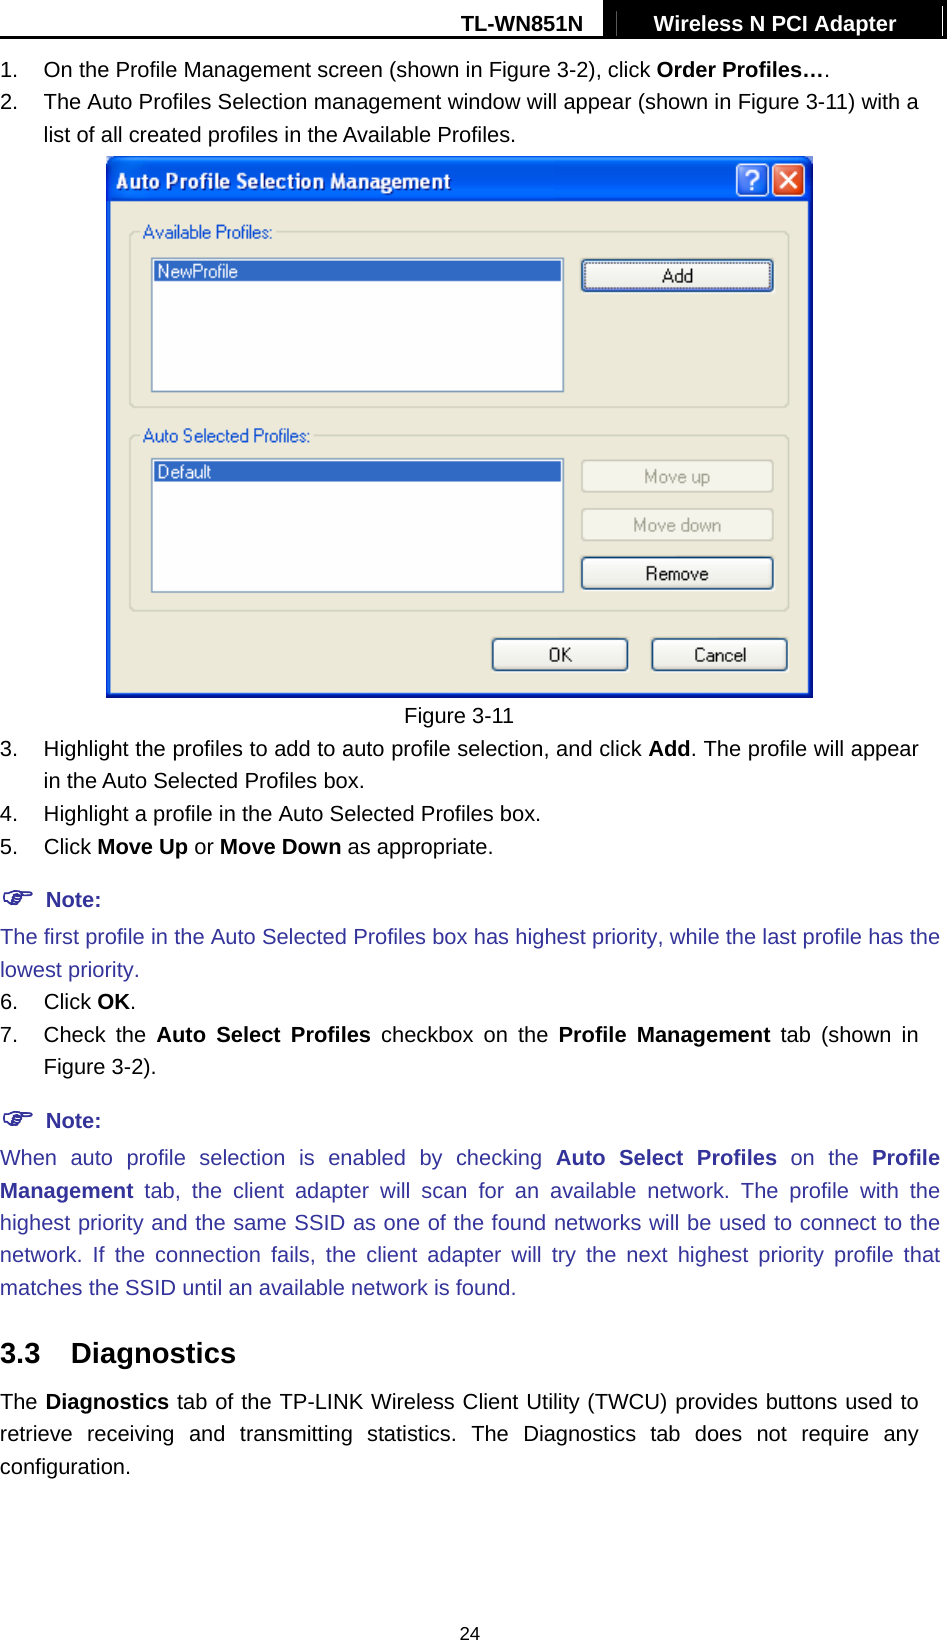 TL-WN851N  Wireless N PCI Adapter   241.  On the Profile Management screen (shown in Figure 3-2), click Order Profiles…. 2.  The Auto Profiles Selection management window will appear (shown in Figure 3-11) with a list of all created profiles in the Available Profiles.  Figure 3-11 3.  Highlight the profiles to add to auto profile selection, and click Add. The profile will appear in the Auto Selected Profiles box. 4.  Highlight a profile in the Auto Selected Profiles box. 5. Click Move Up or Move Down as appropriate.   ) Note: The first profile in the Auto Selected Profiles box has highest priority, while the last profile has the lowest priority. 6. Click OK. 7. Check the Auto Select Profiles checkbox on the Profile Management tab (shown in Figure 3-2). ) Note: When auto profile selection is enabled by checking Auto Select Profiles on the Profile Management tab, the client adapter will scan for an available network. The profile with the highest priority and the same SSID as one of the found networks will be used to connect to the network. If the connection fails, the client adapter will try the next highest priority profile that matches the SSID until an available network is found. 3.3  Diagnostics The Diagnostics tab of the TP-LINK Wireless Client Utility (TWCU) provides buttons used to retrieve receiving and transmitting statistics. The Diagnostics tab does not require any configuration. 